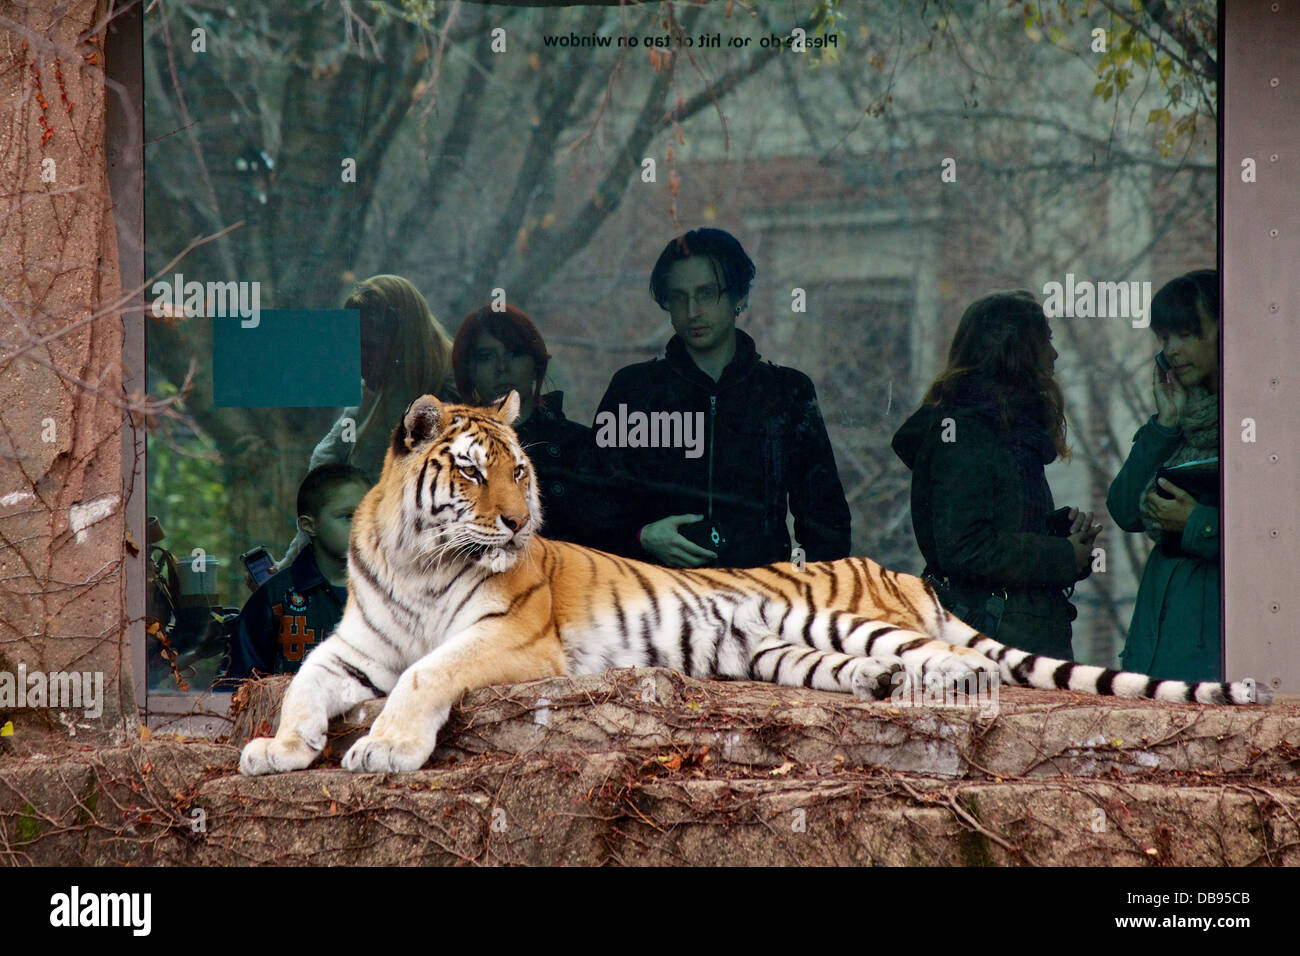 Siberian tiger (Panthera tigris altaica) and onlookers at Lincoln Park Zoo, Chicago, Illinois Stock Photo